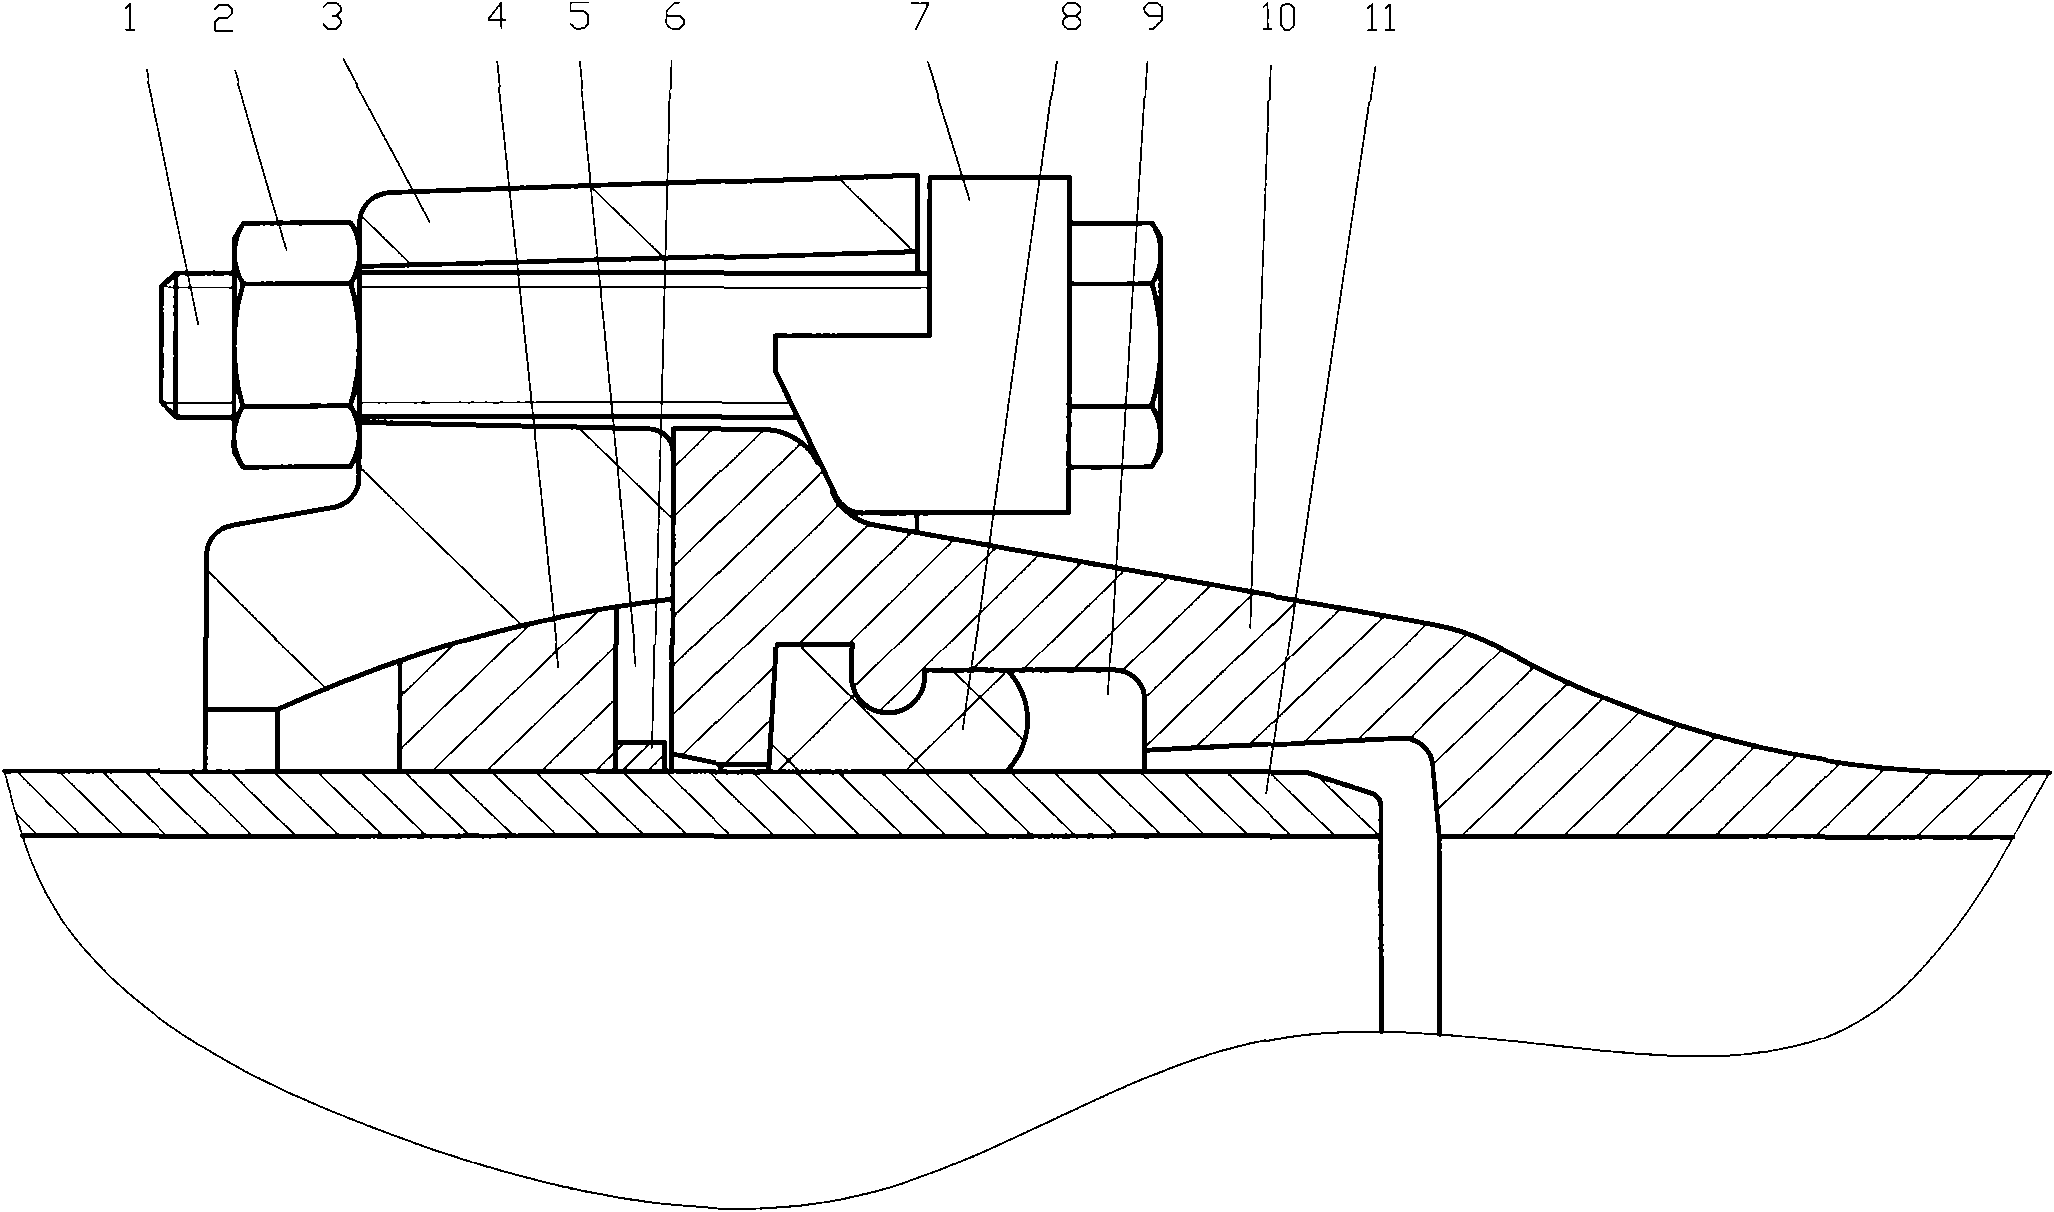 Self-anchoring port fixedly-connecting structure